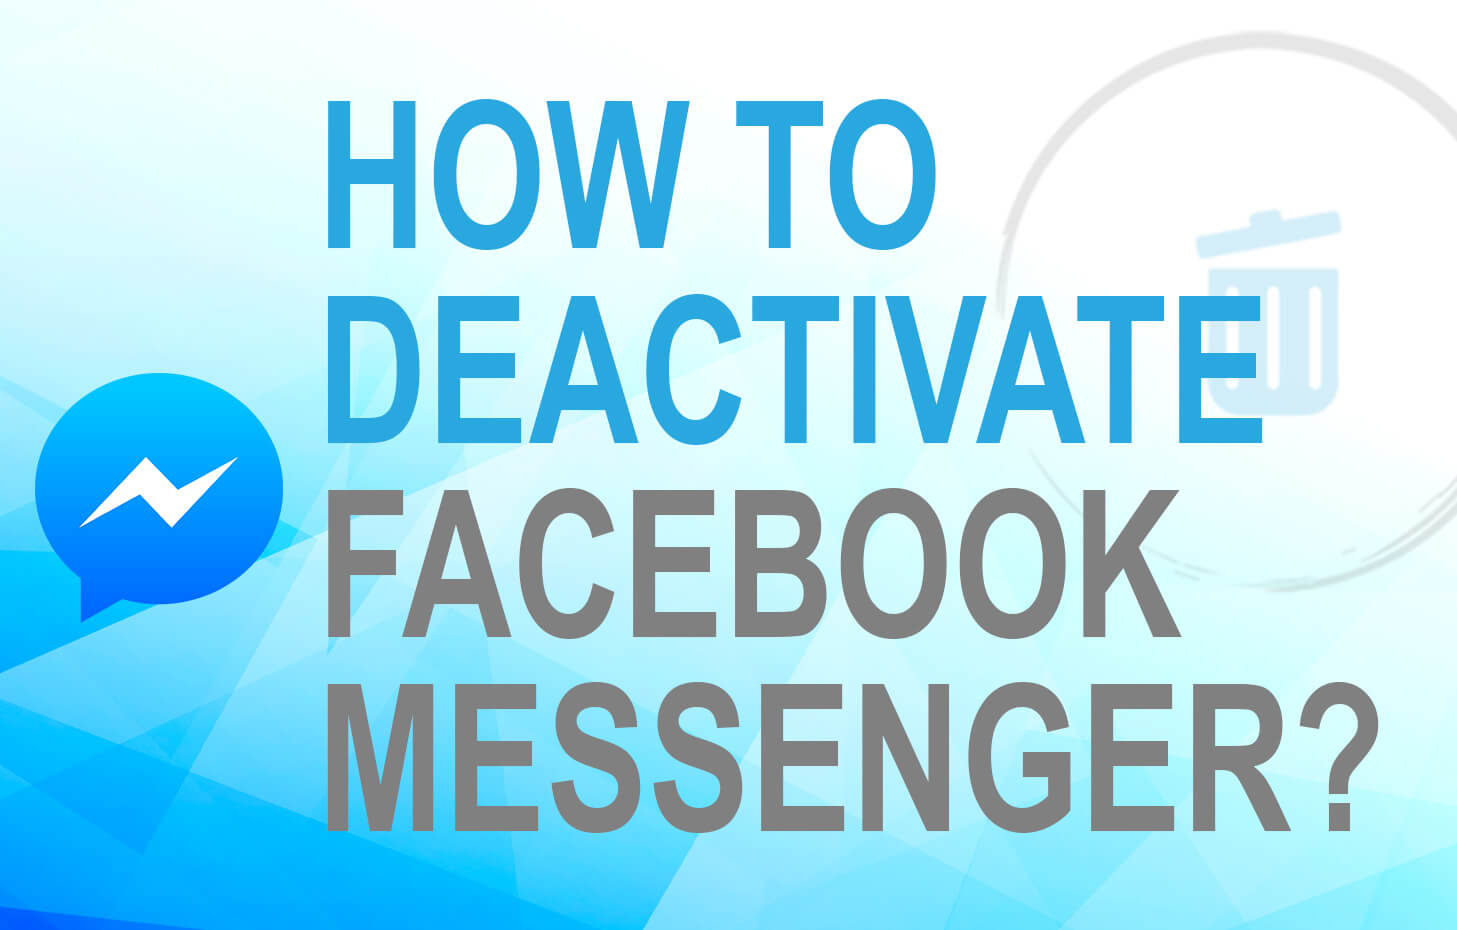 How To Deactivate Messenger